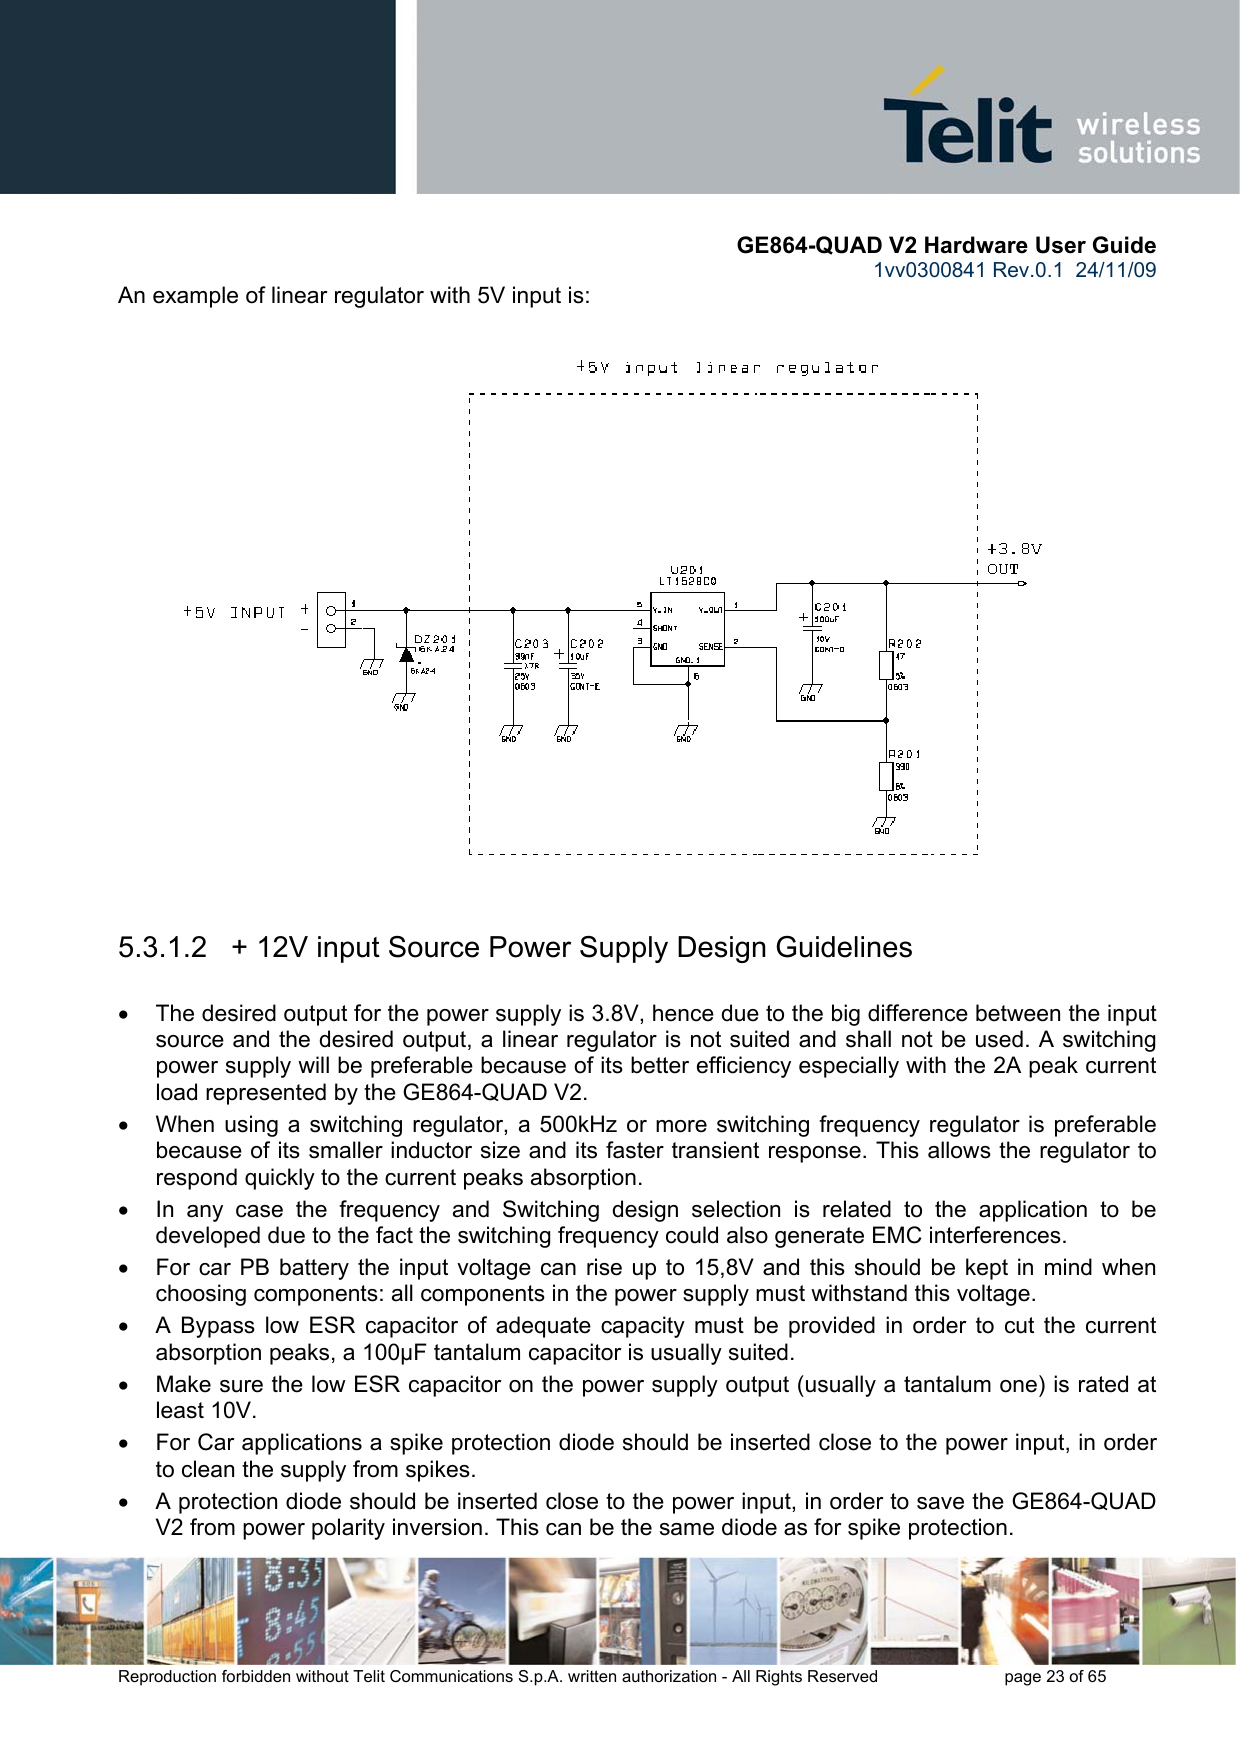       GE864-QUAD V2 Hardware User Guide 1vv0300841 Rev.0.1  24/11/09      Reproduction forbidden without Telit Communications S.p.A. written authorization - All Rights Reserved    page 23 of 65  An example of linear regulator with 5V input is:    5.3.1.2   + 12V input Source Power Supply Design Guidelines  •  The desired output for the power supply is 3.8V, hence due to the big difference between the input source and the desired output, a linear regulator is not suited and shall not be used. A switching power supply will be preferable because of its better efficiency especially with the 2A peak current load represented by the GE864-QUAD V2. •  When using a switching regulator, a 500kHz or more switching frequency regulator is preferable because of its smaller inductor size and its faster transient response. This allows the regulator to respond quickly to the current peaks absorption.  •  In any case the frequency and Switching design selection is related to the application to be developed due to the fact the switching frequency could also generate EMC interferences. •  For car PB battery the input voltage can rise up to 15,8V and this should be kept in mind when choosing components: all components in the power supply must withstand this voltage. •  A Bypass low ESR capacitor of adequate capacity must be provided in order to cut the current absorption peaks, a 100μF tantalum capacitor is usually suited. •  Make sure the low ESR capacitor on the power supply output (usually a tantalum one) is rated at least 10V. •  For Car applications a spike protection diode should be inserted close to the power input, in order to clean the supply from spikes.  •  A protection diode should be inserted close to the power input, in order to save the GE864-QUAD V2 from power polarity inversion. This can be the same diode as for spike protection. 